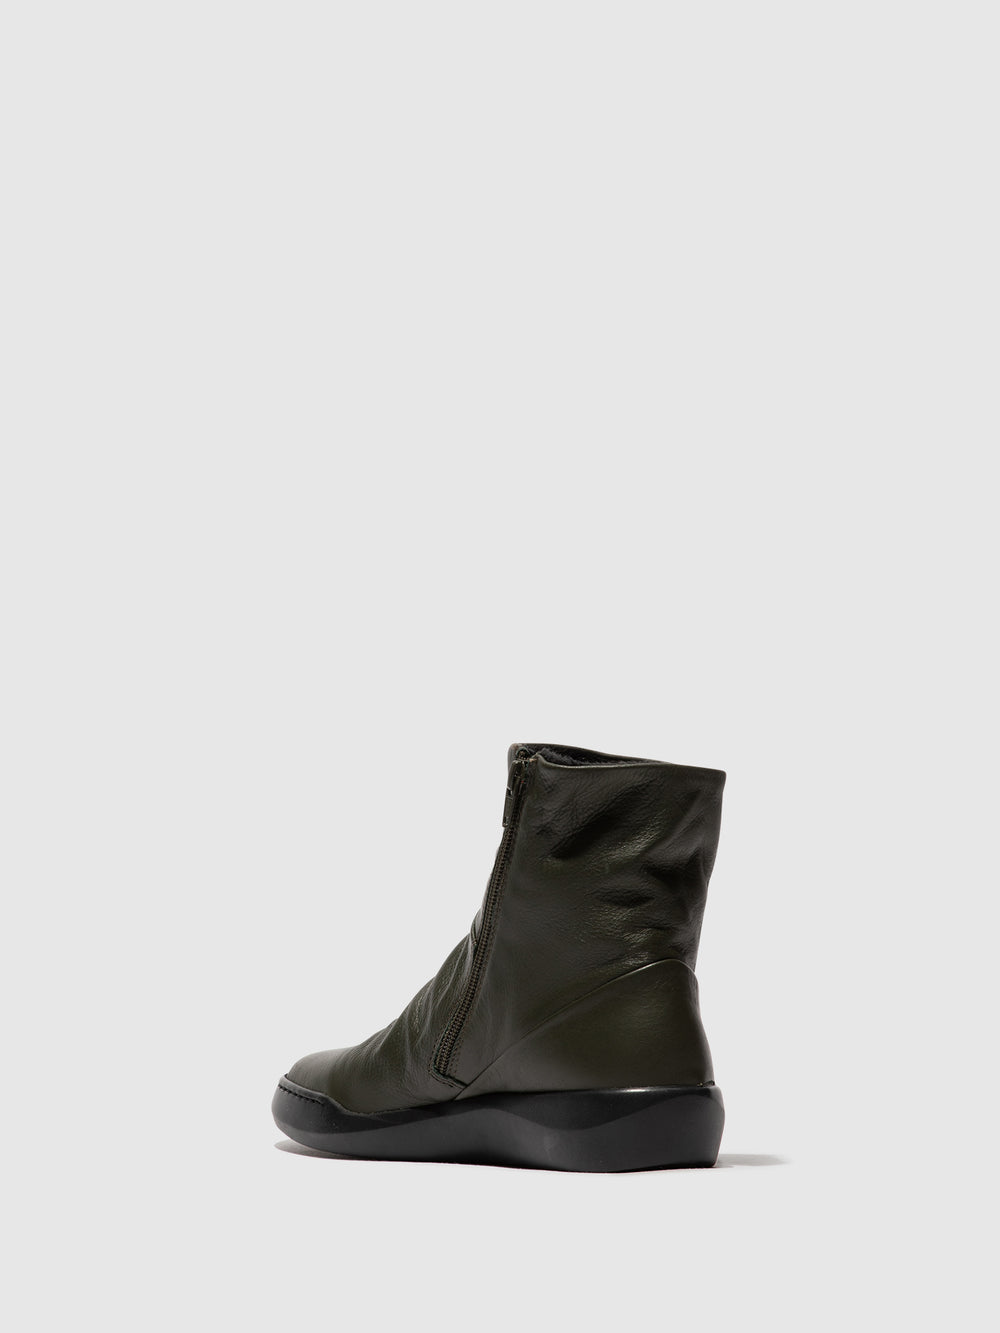 Zip Up Ankle Boots BLER550SOF MILITARY